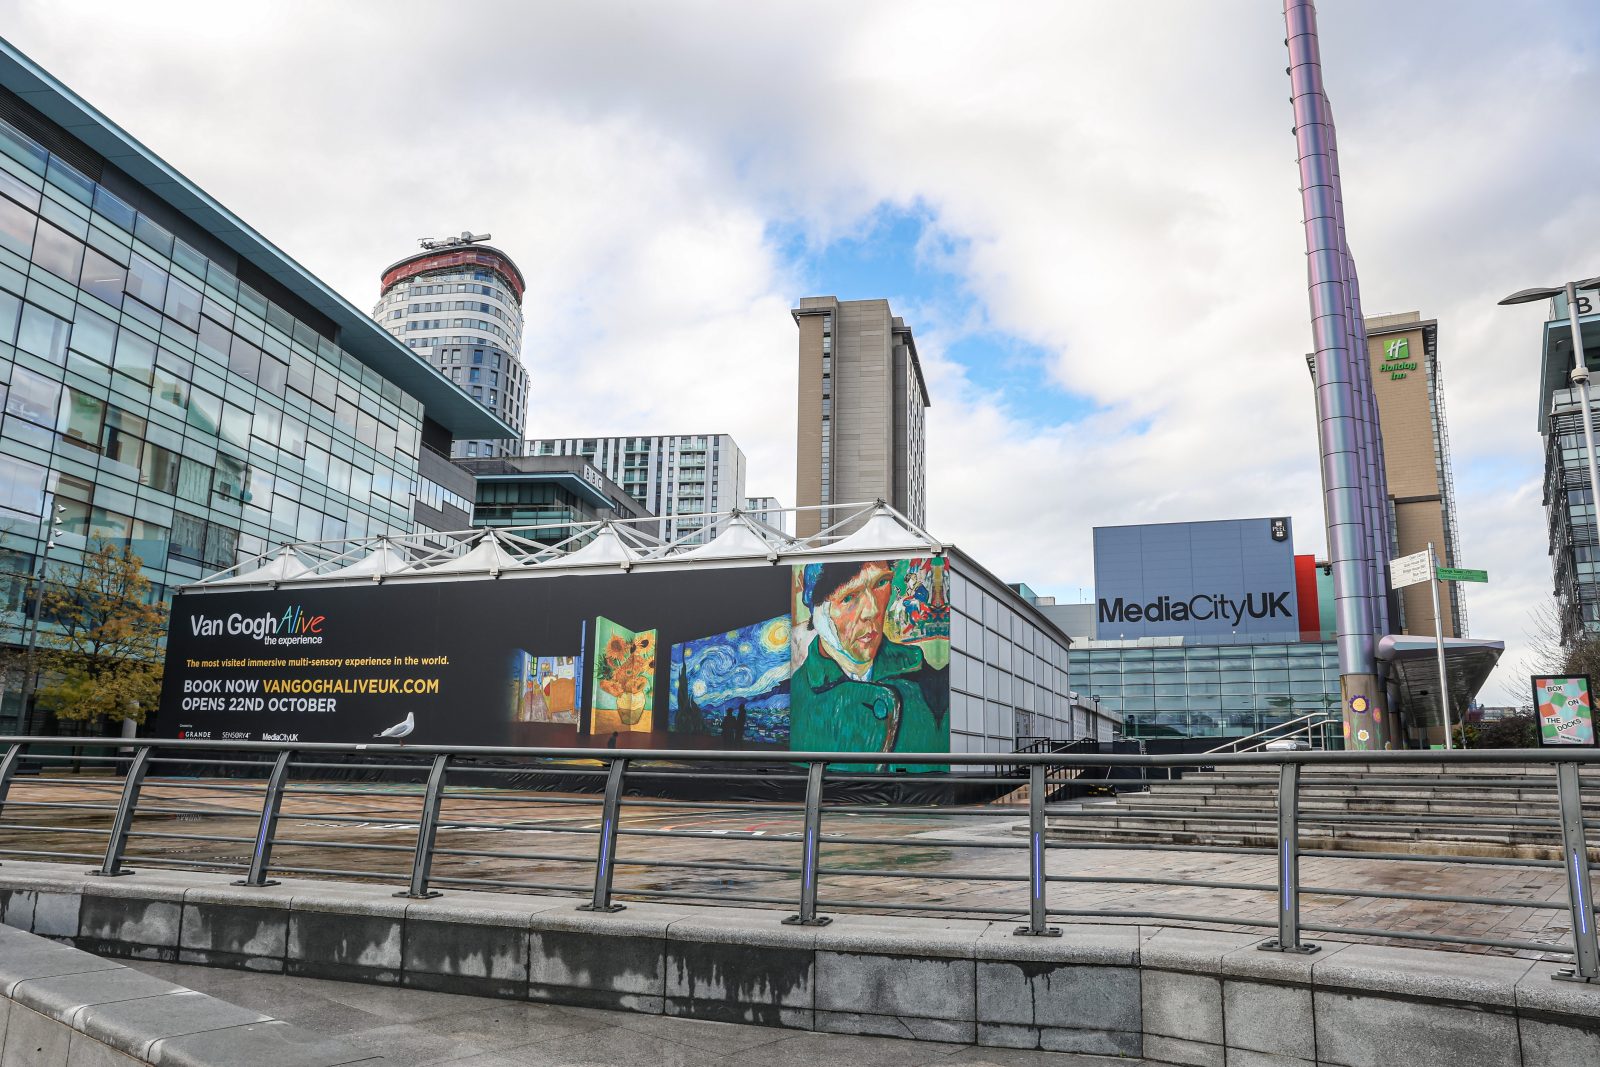 The incredible Van Gogh Alive experience has extended its run in Greater Manchester, The Manc